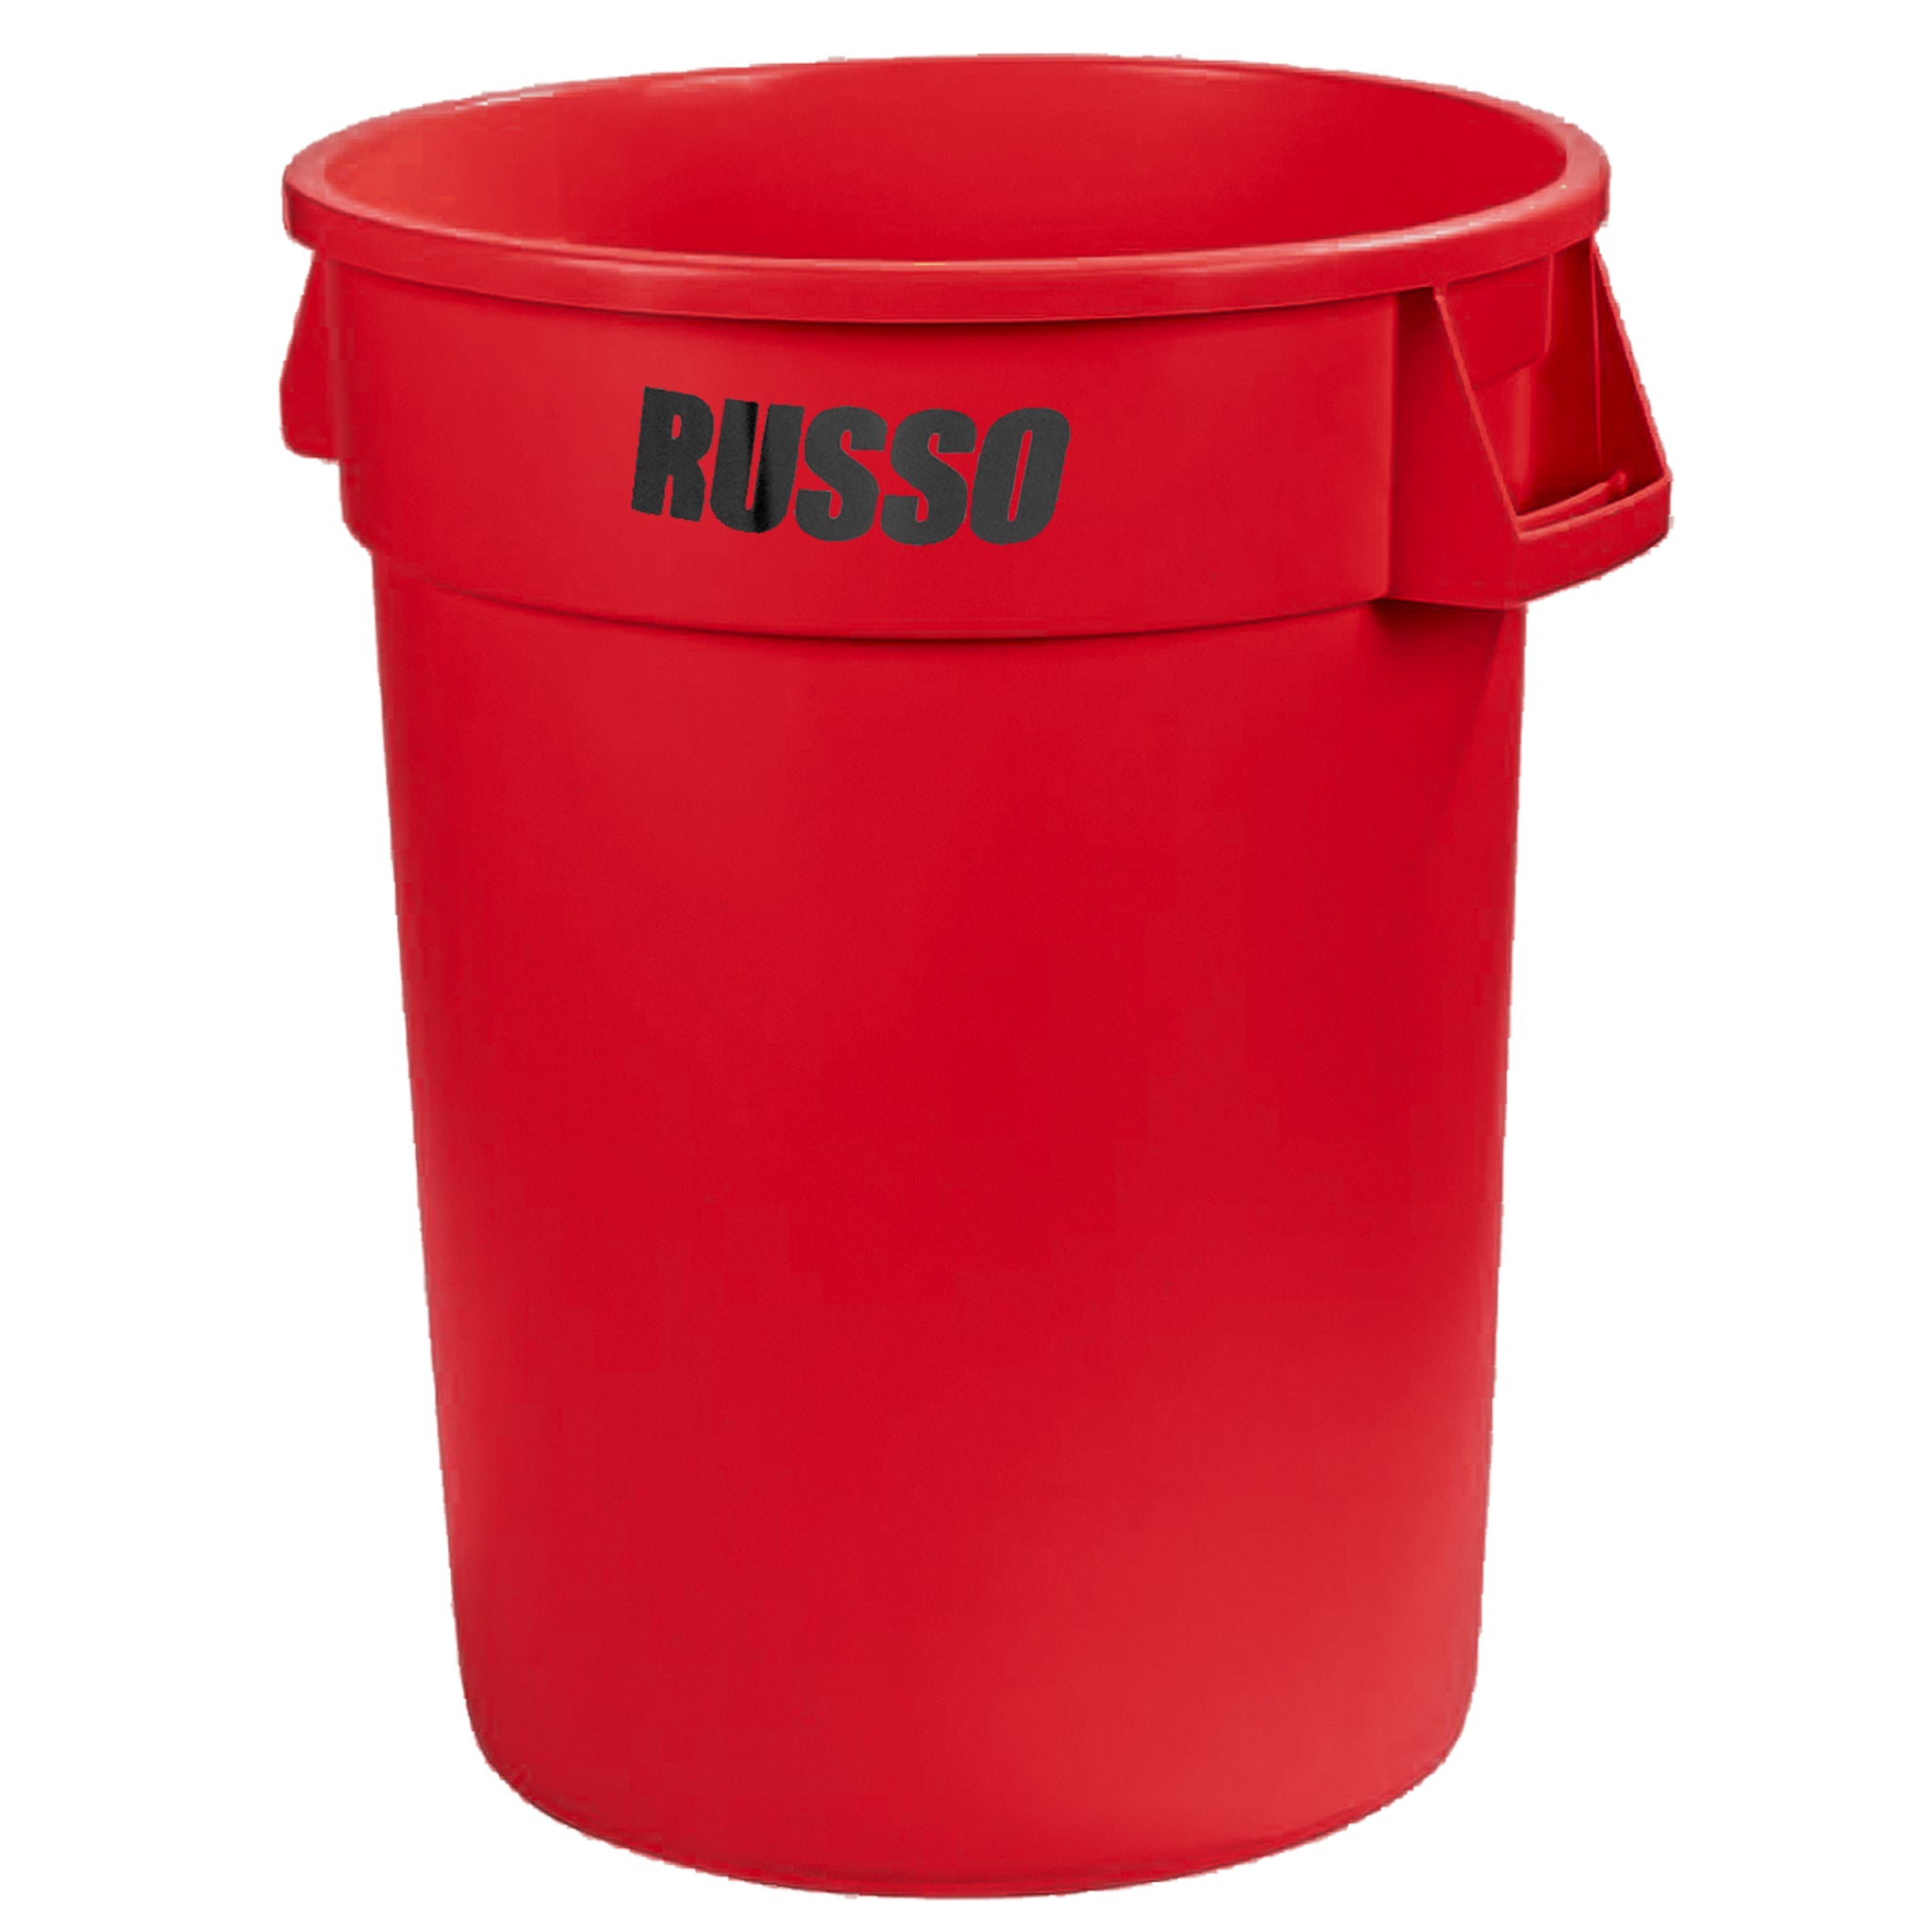 RUSSO Glow Garbage Can 32 Gallon - Red